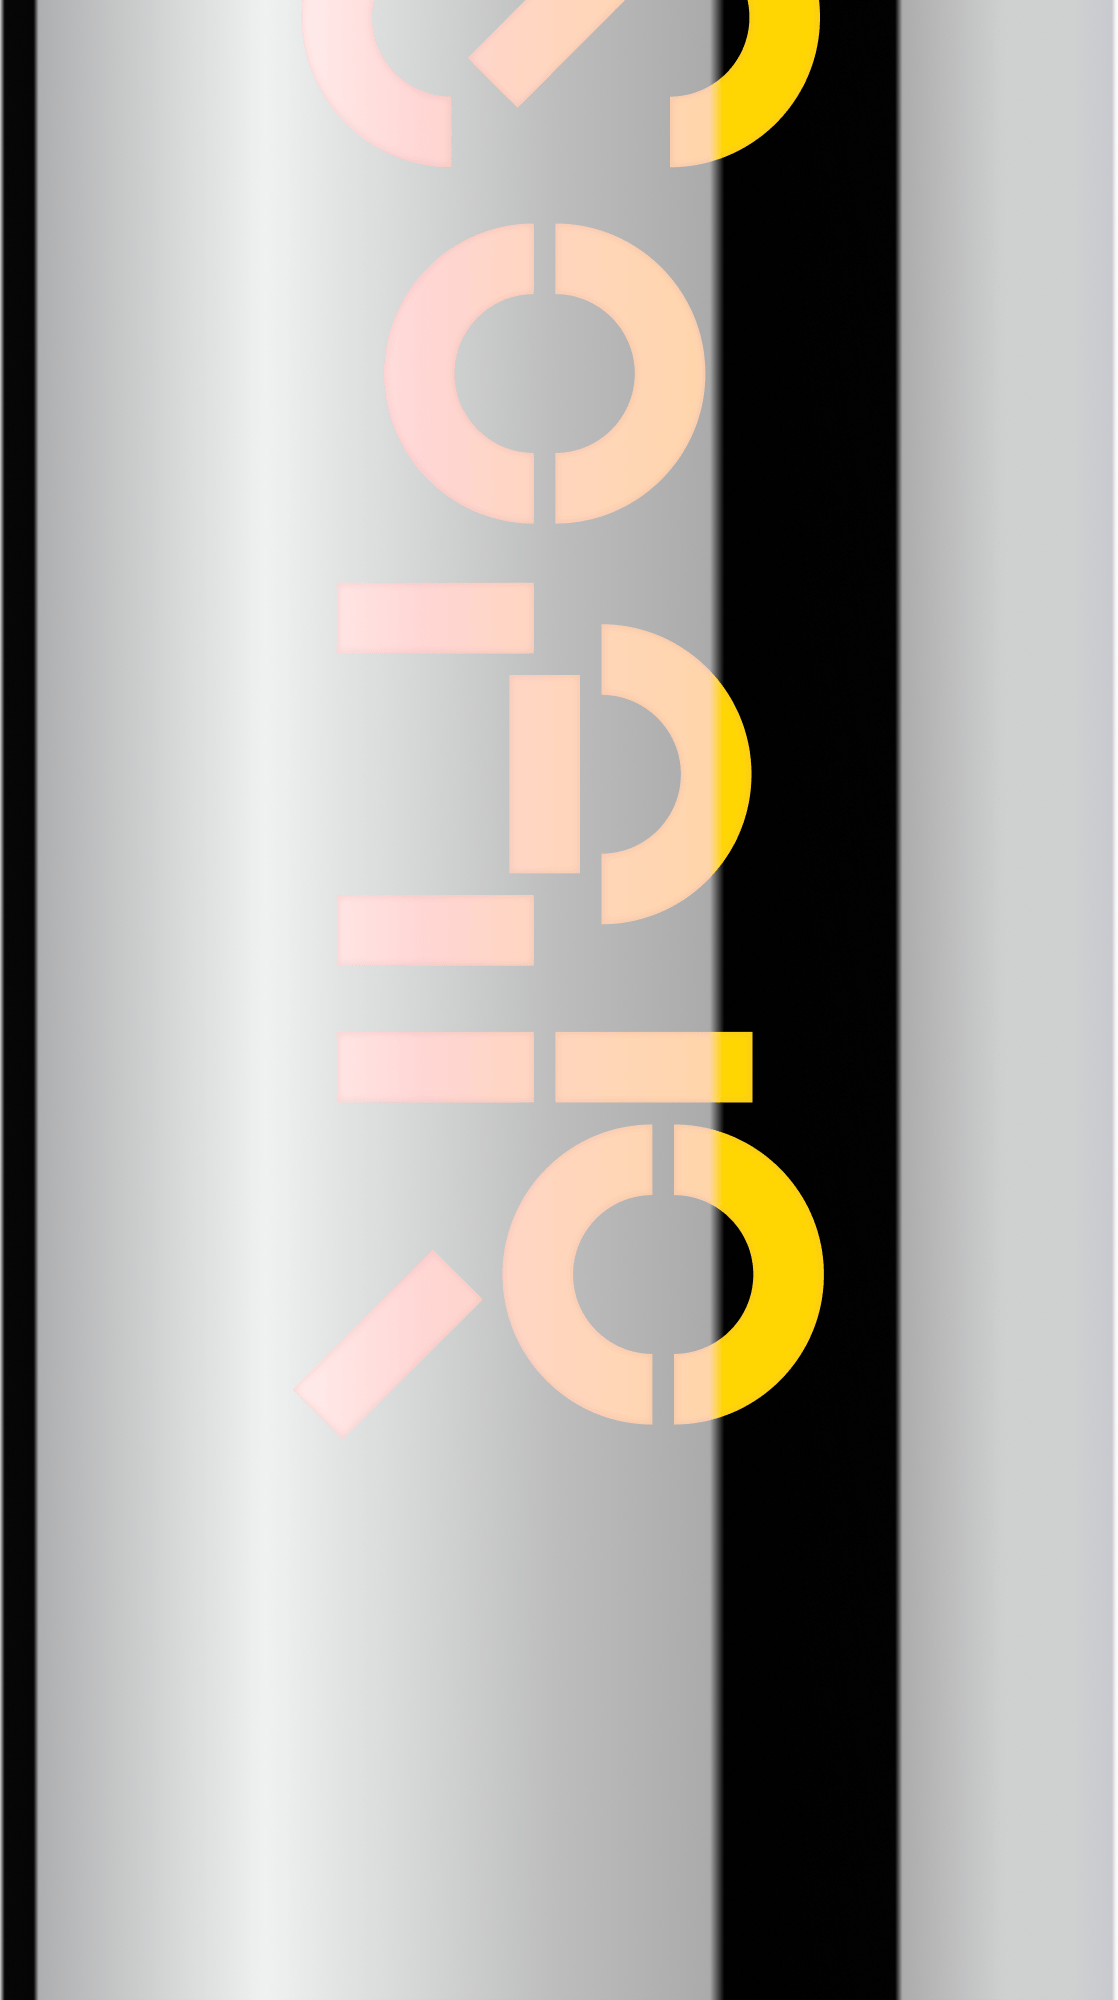 Deconstructed wordmark concept on a metal tube